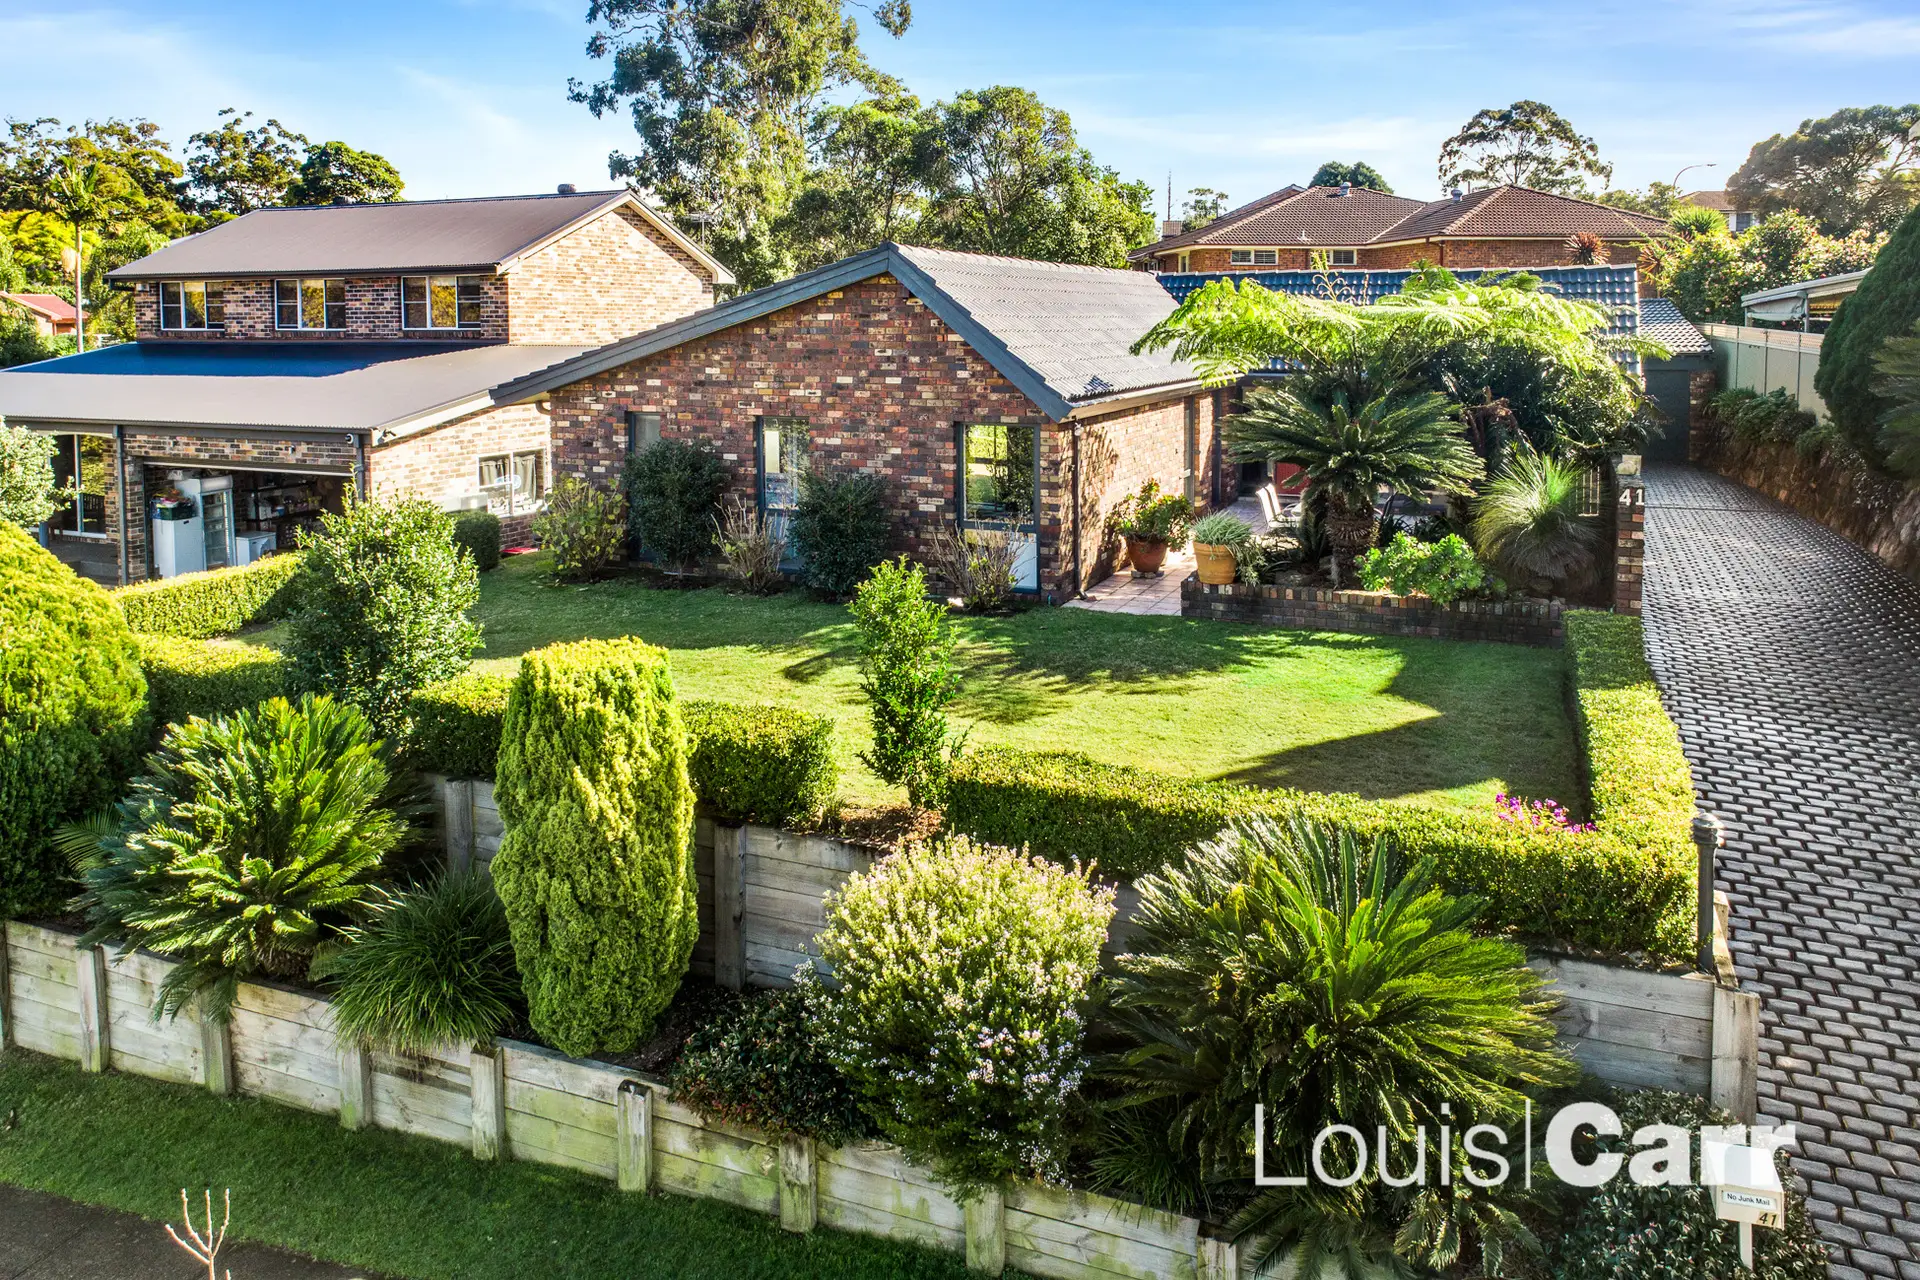 Photo #1: 41 Francis Greenway Drive, Cherrybrook - Sold by Louis Carr Real Estate